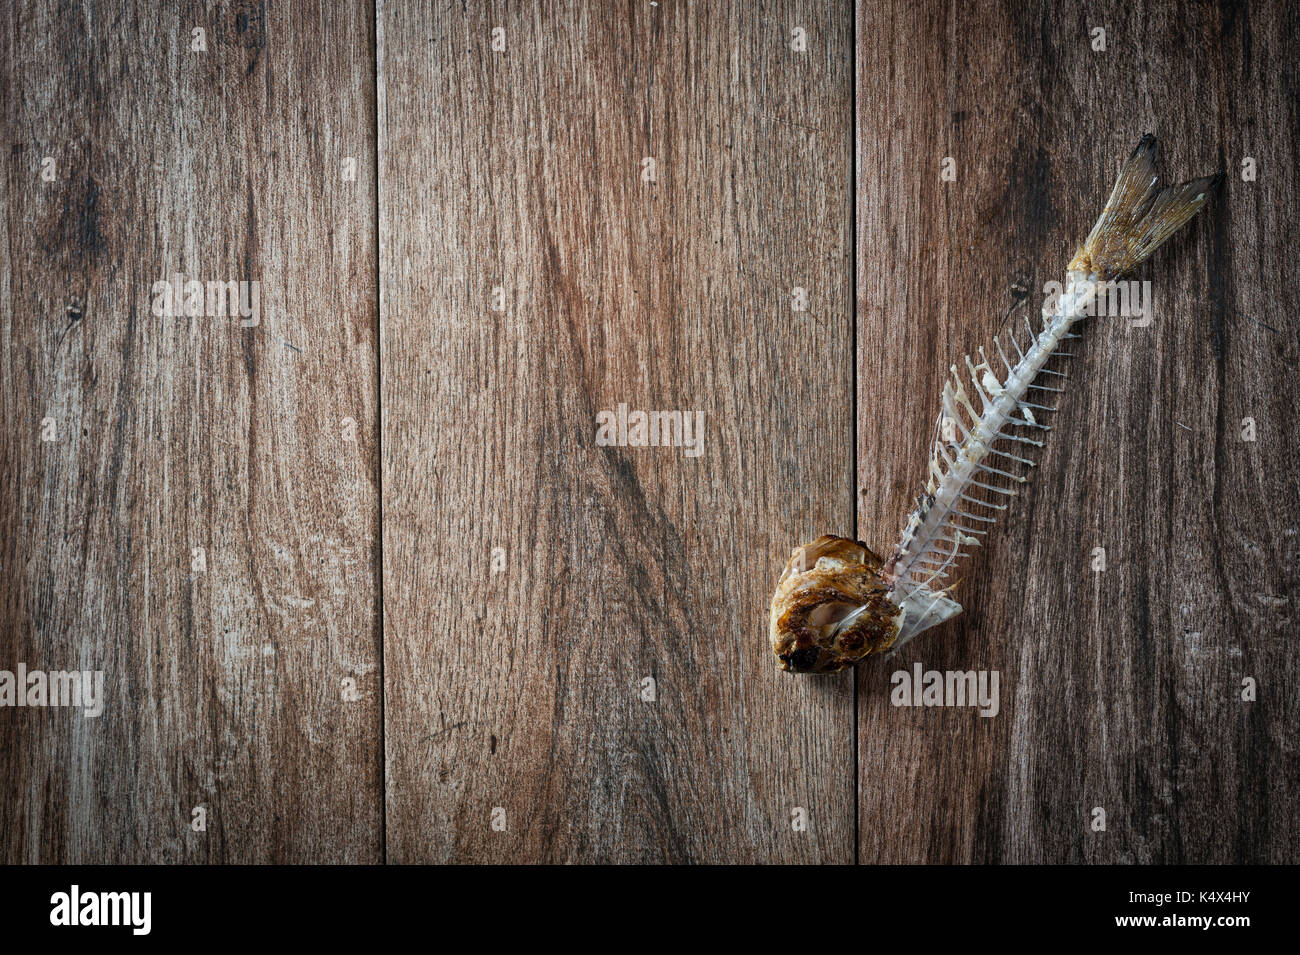 Fish bone on rustic wooden background. Stock Photo